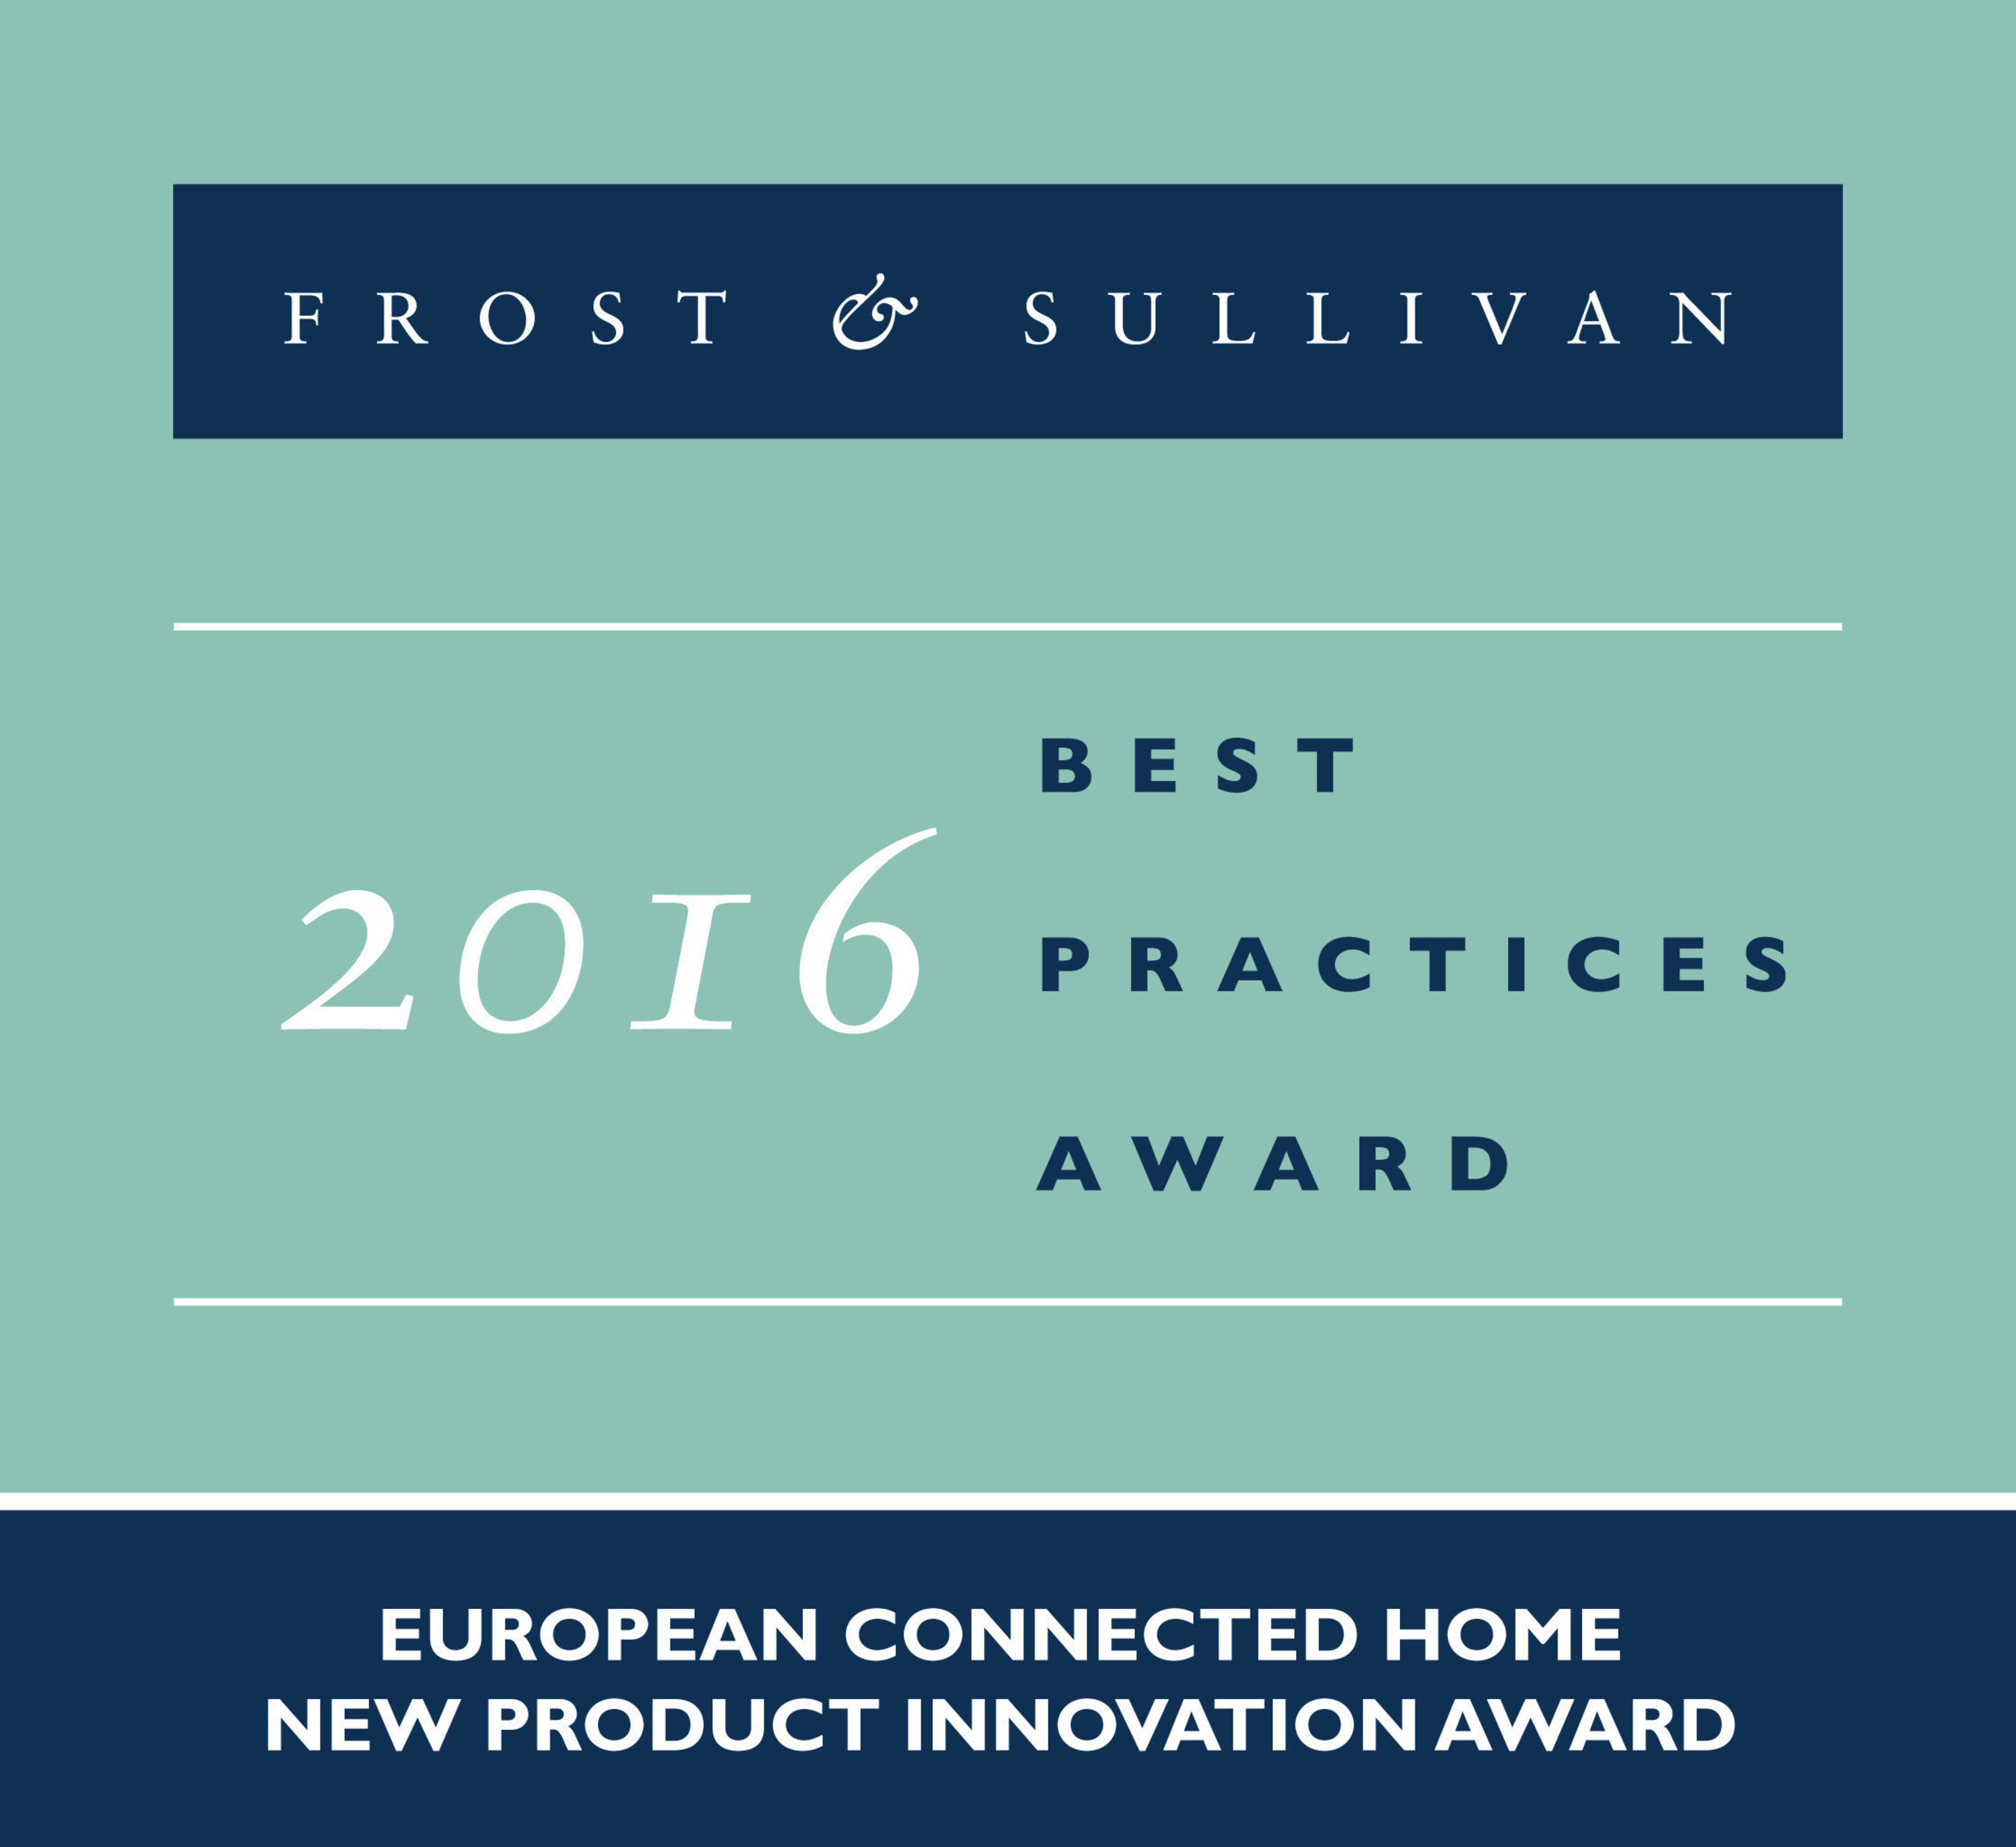 Deutsche Telekom Receives 2016 European Connected Home New Product Innovation Award